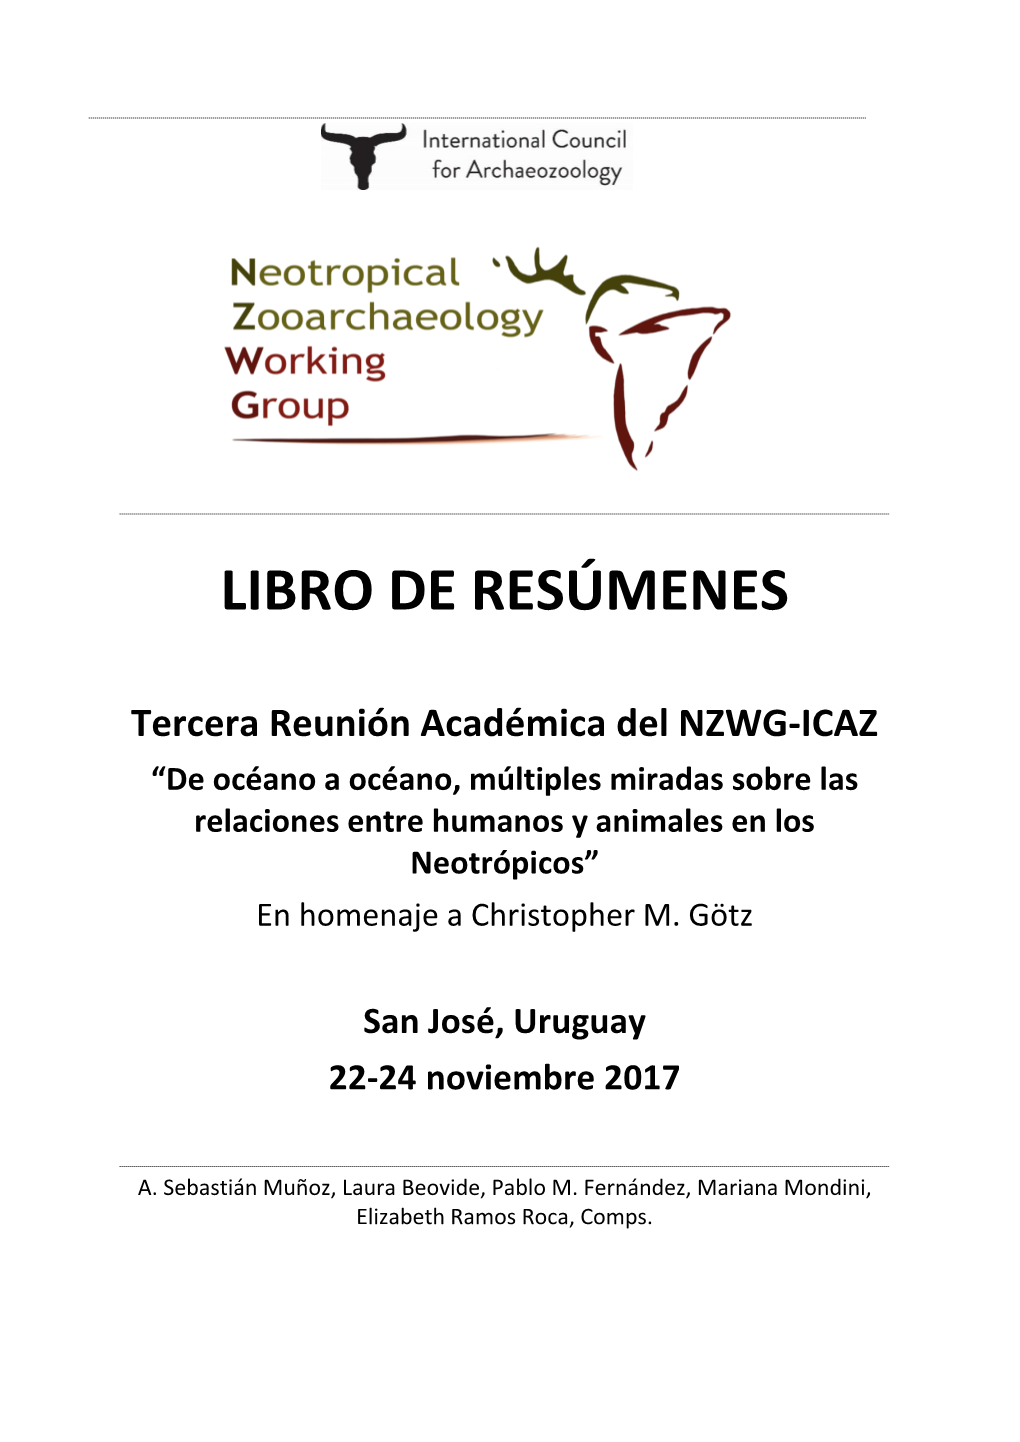 ICAZ Neotropical Zooarchaeology Working Group (NZWG)